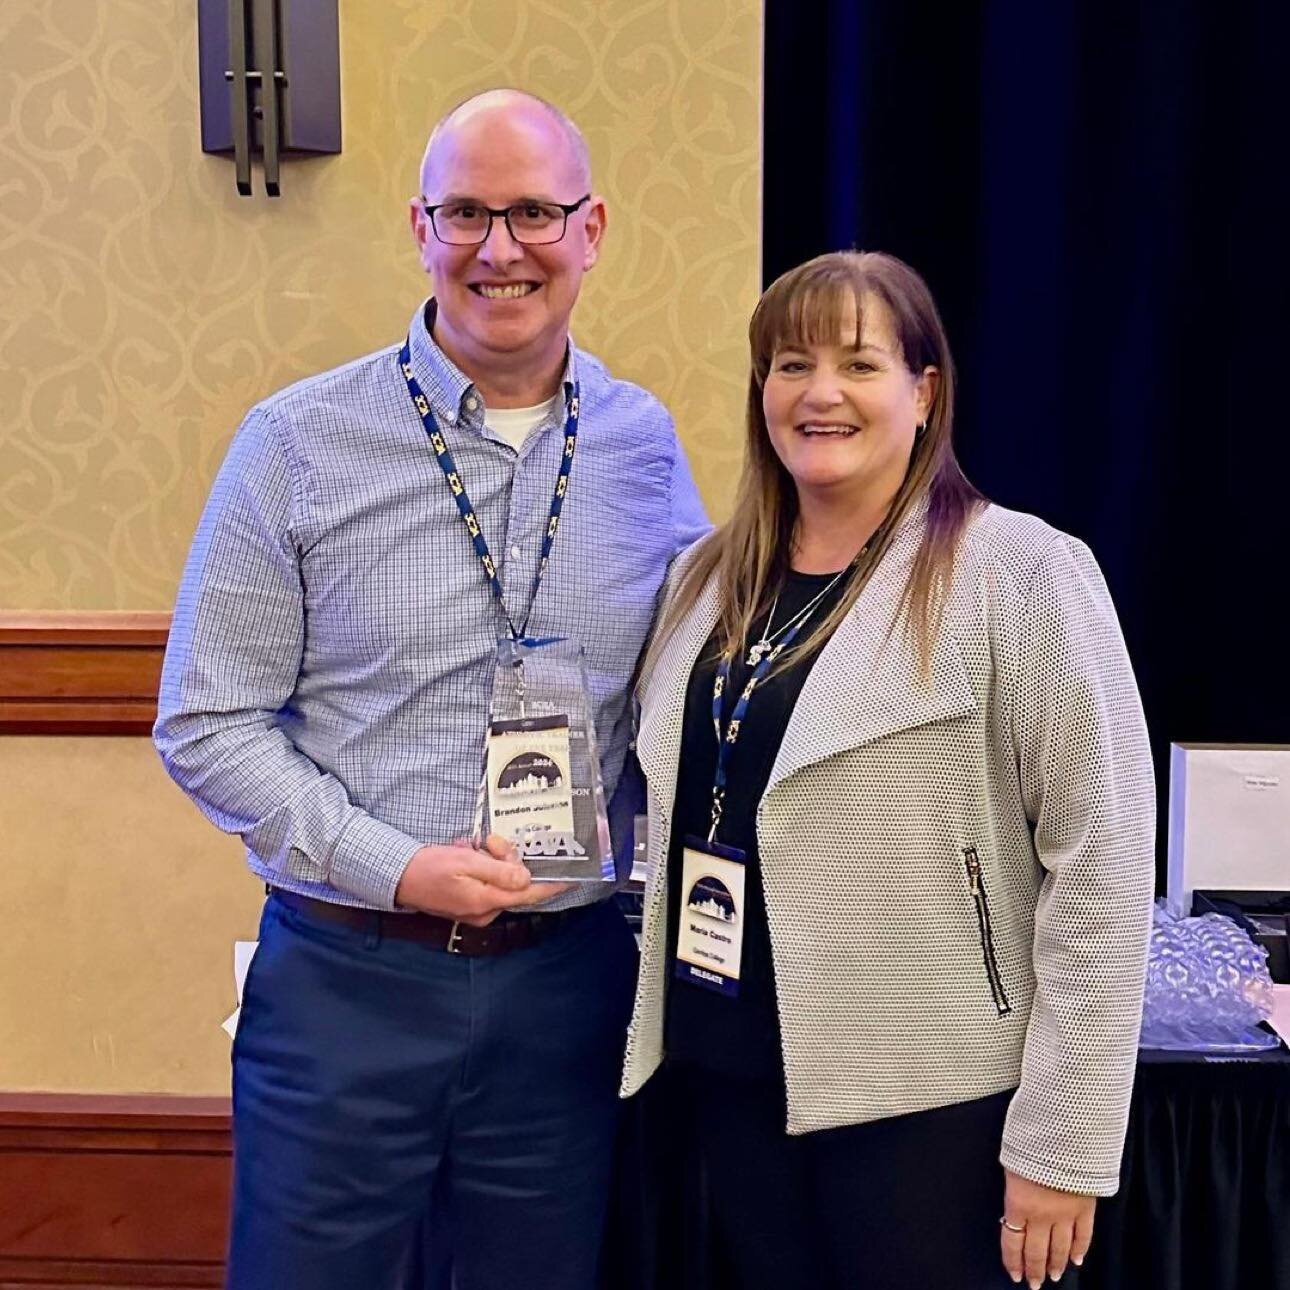 We are excited to celebrate Brandon Johnson as our 3C2A Athletic Trainer of the Year! Brandon, from Sierra College, guided us through COVID as our 3CATA President and was the founding chair and continued member of our EDI committee. Thank you Brandon